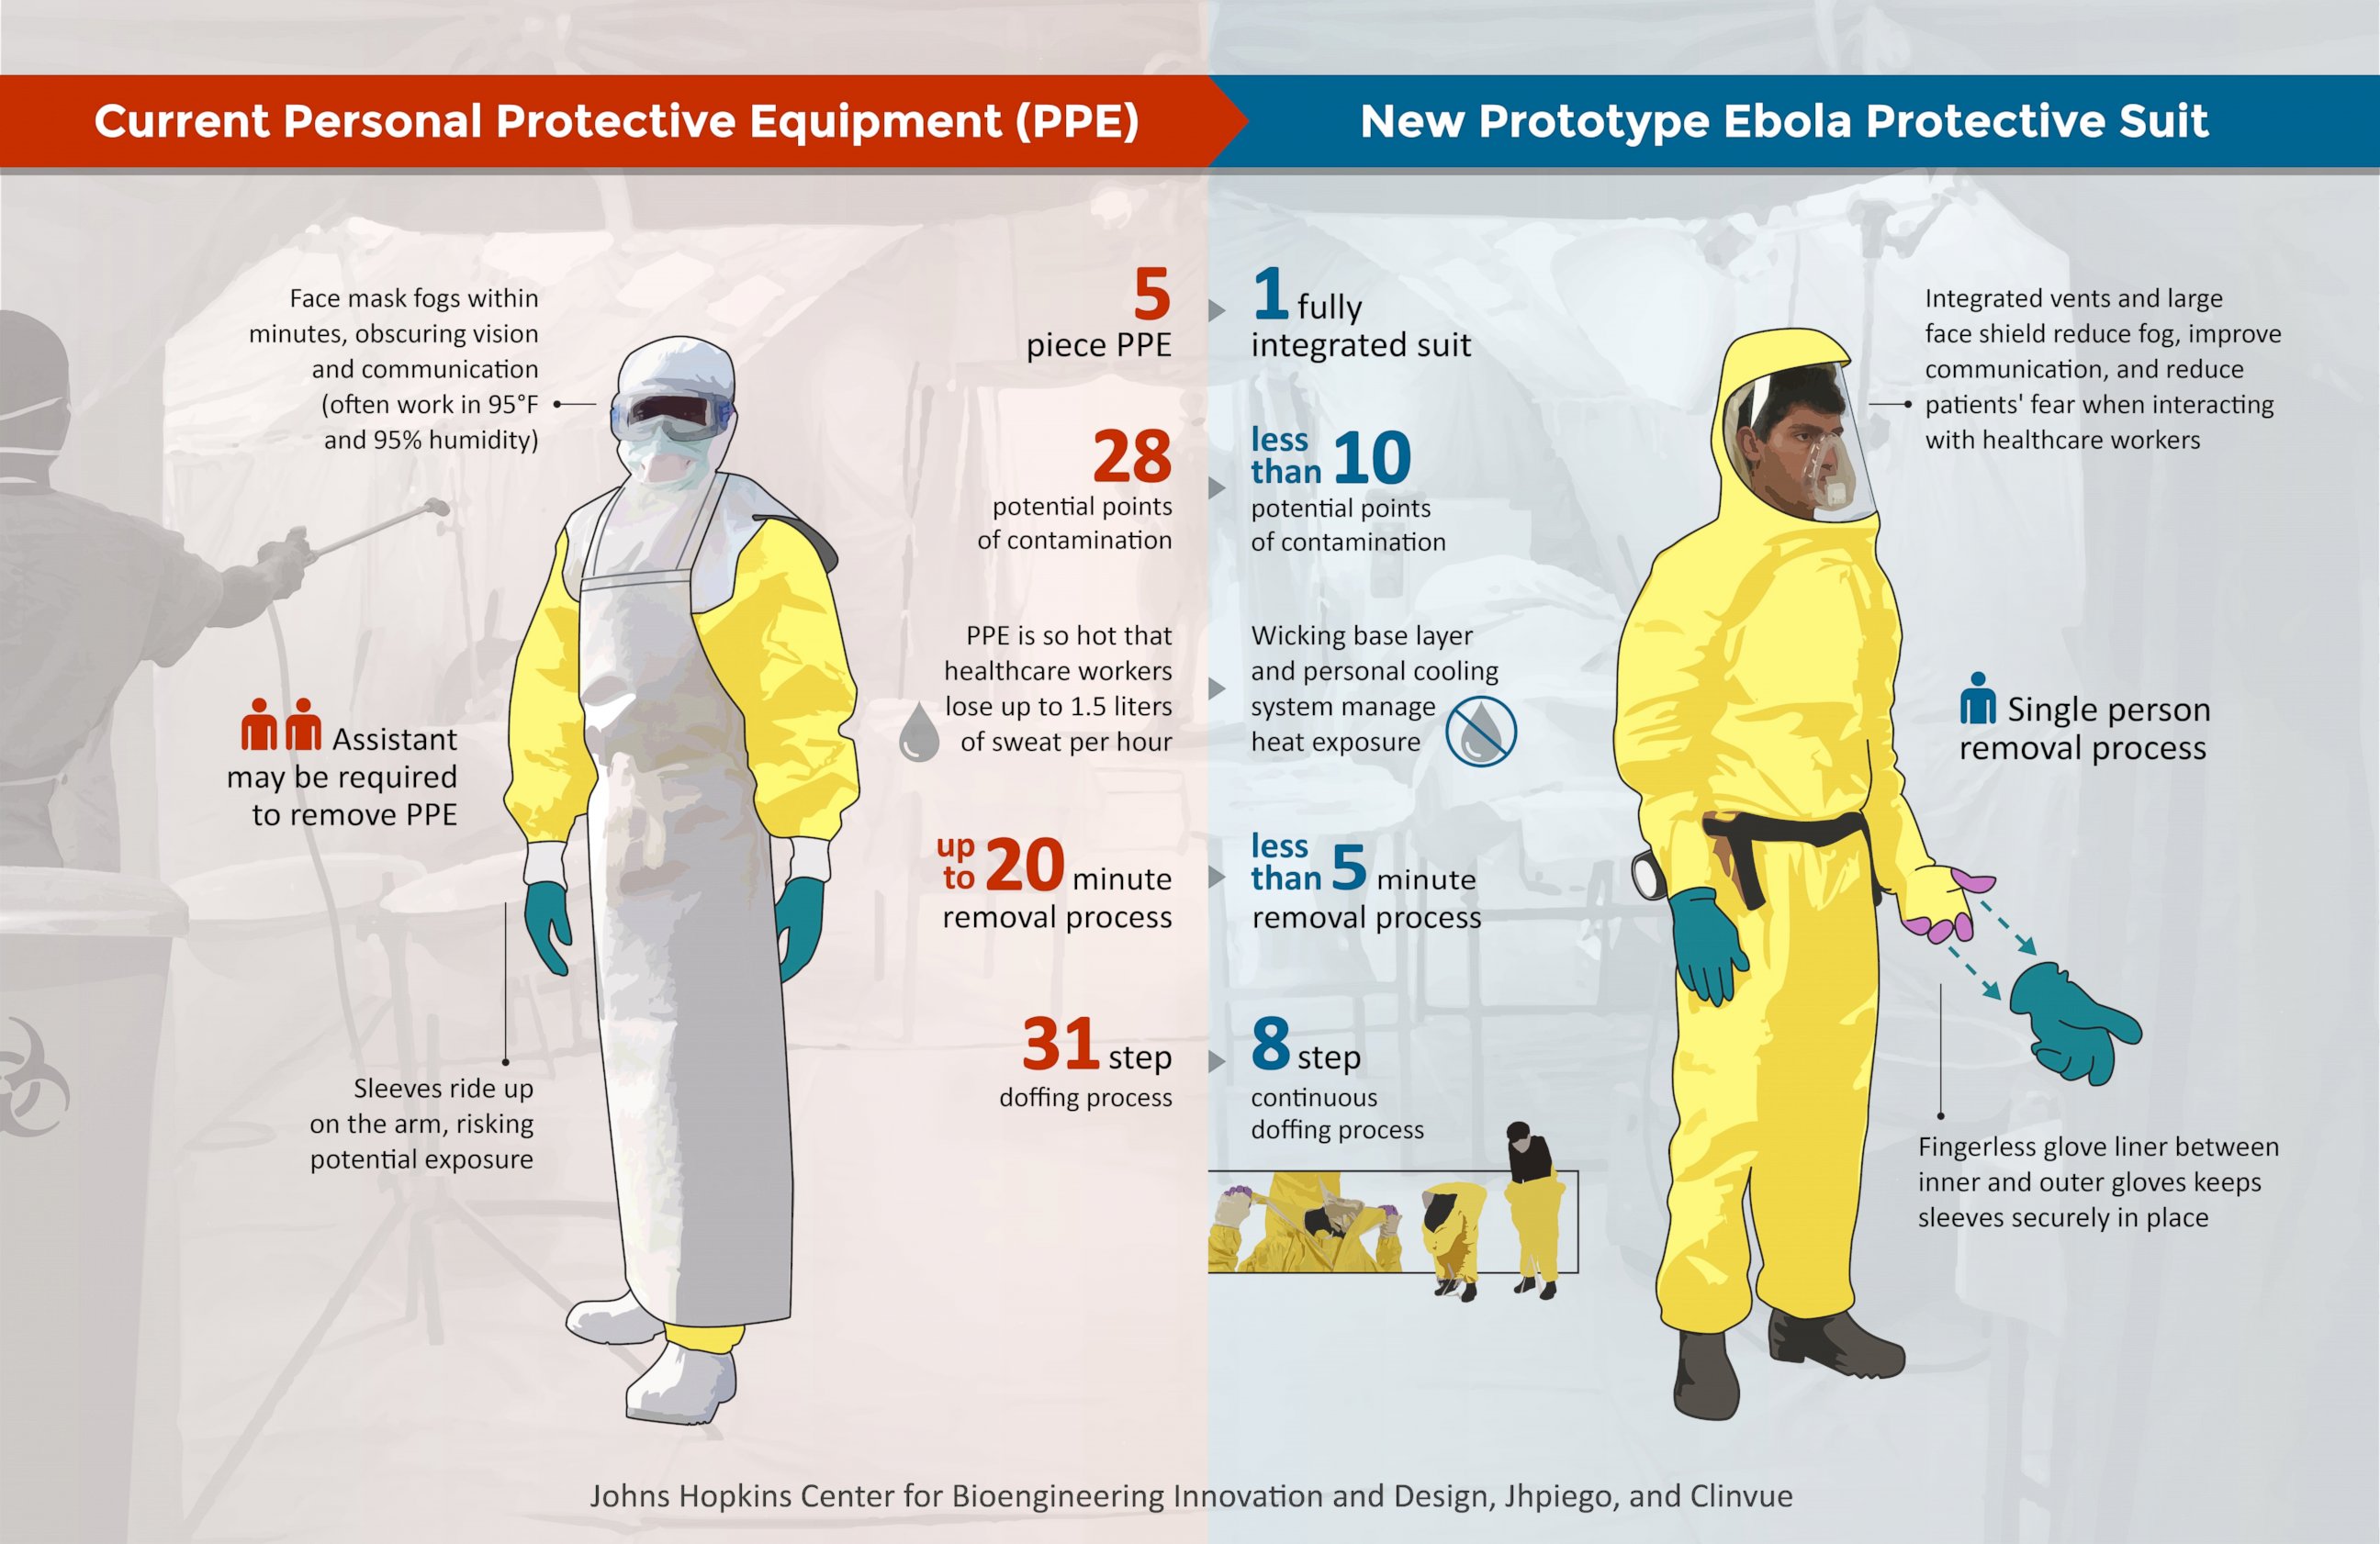 PHOTO: The current personal protective equipment is shown next to the new prototype Ebola protective suit in this infographic.